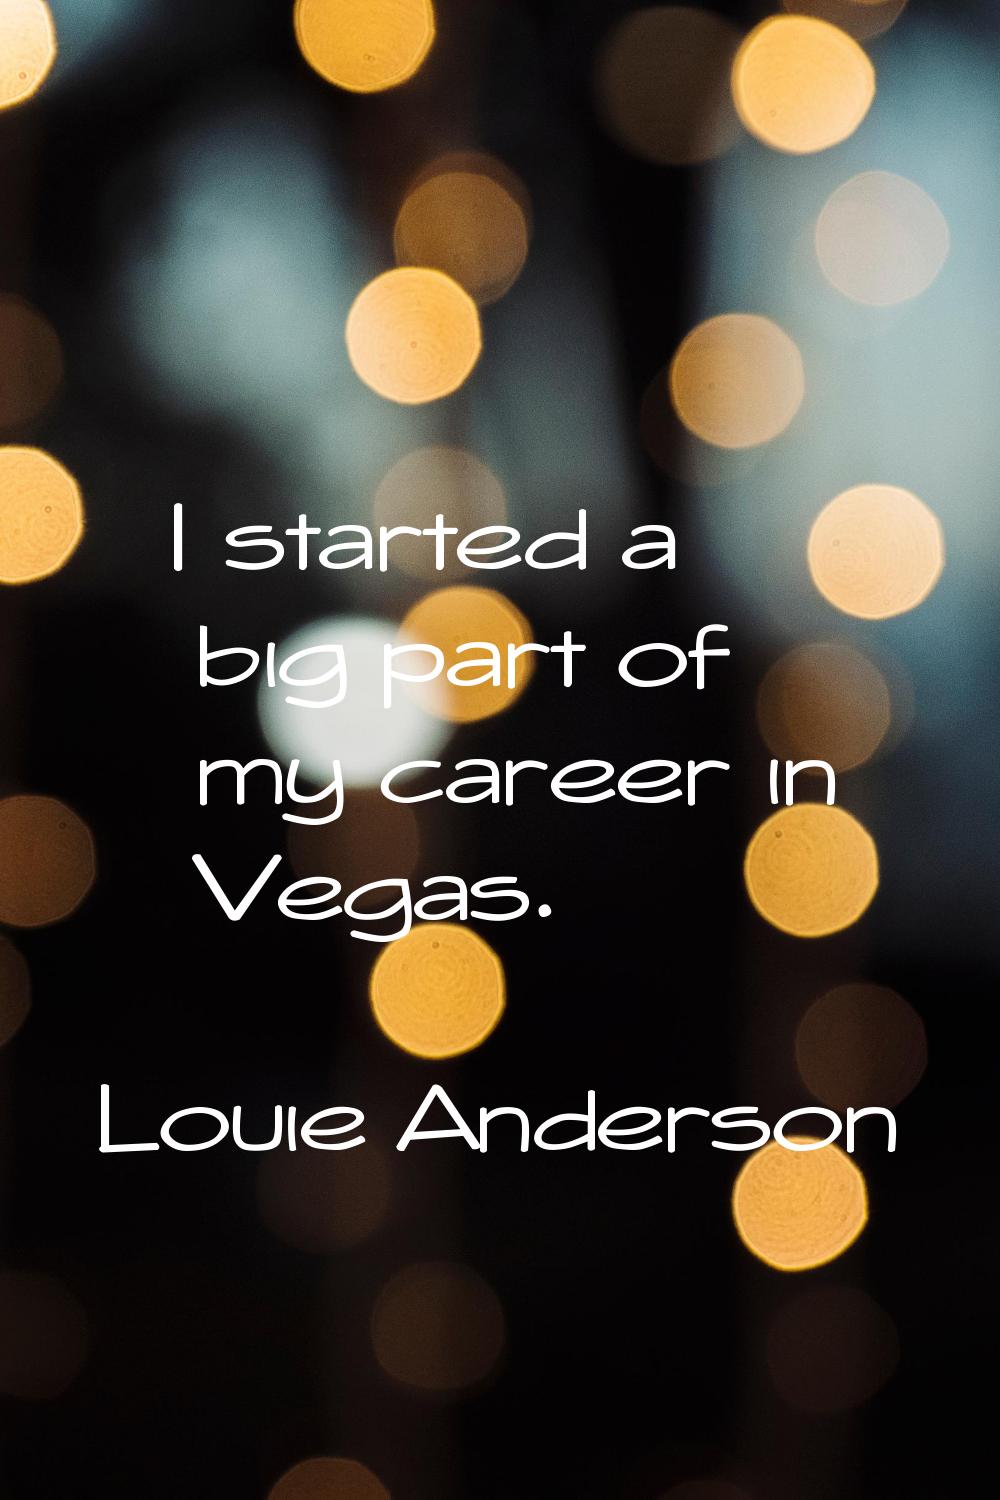 I started a big part of my career in Vegas.